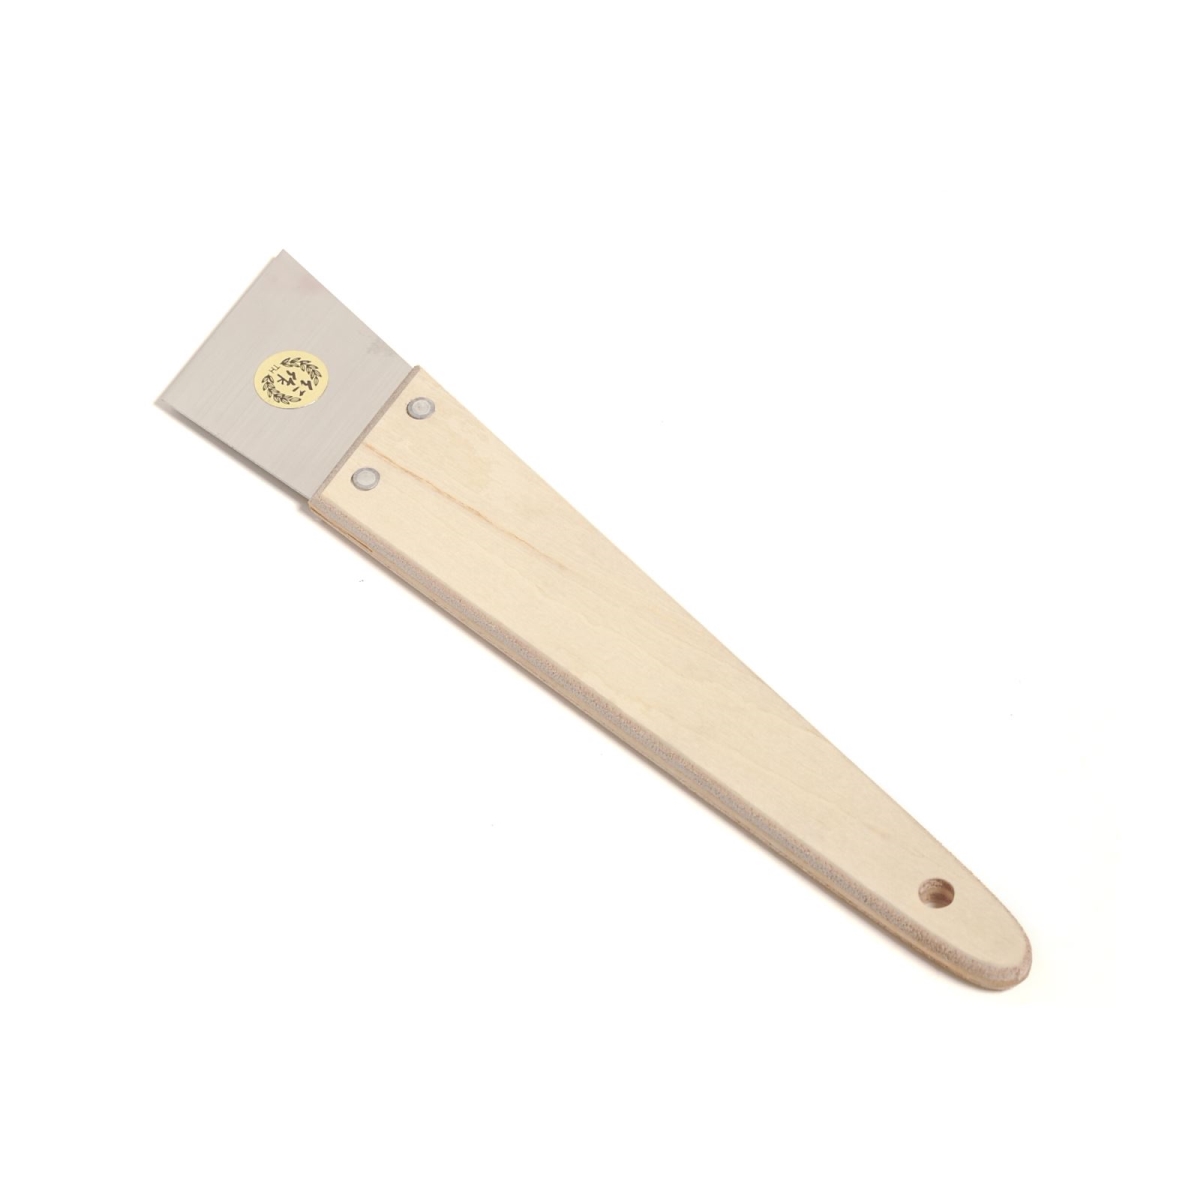 Njp485 1.75 In. Blade Stainless Steel Putty Knife